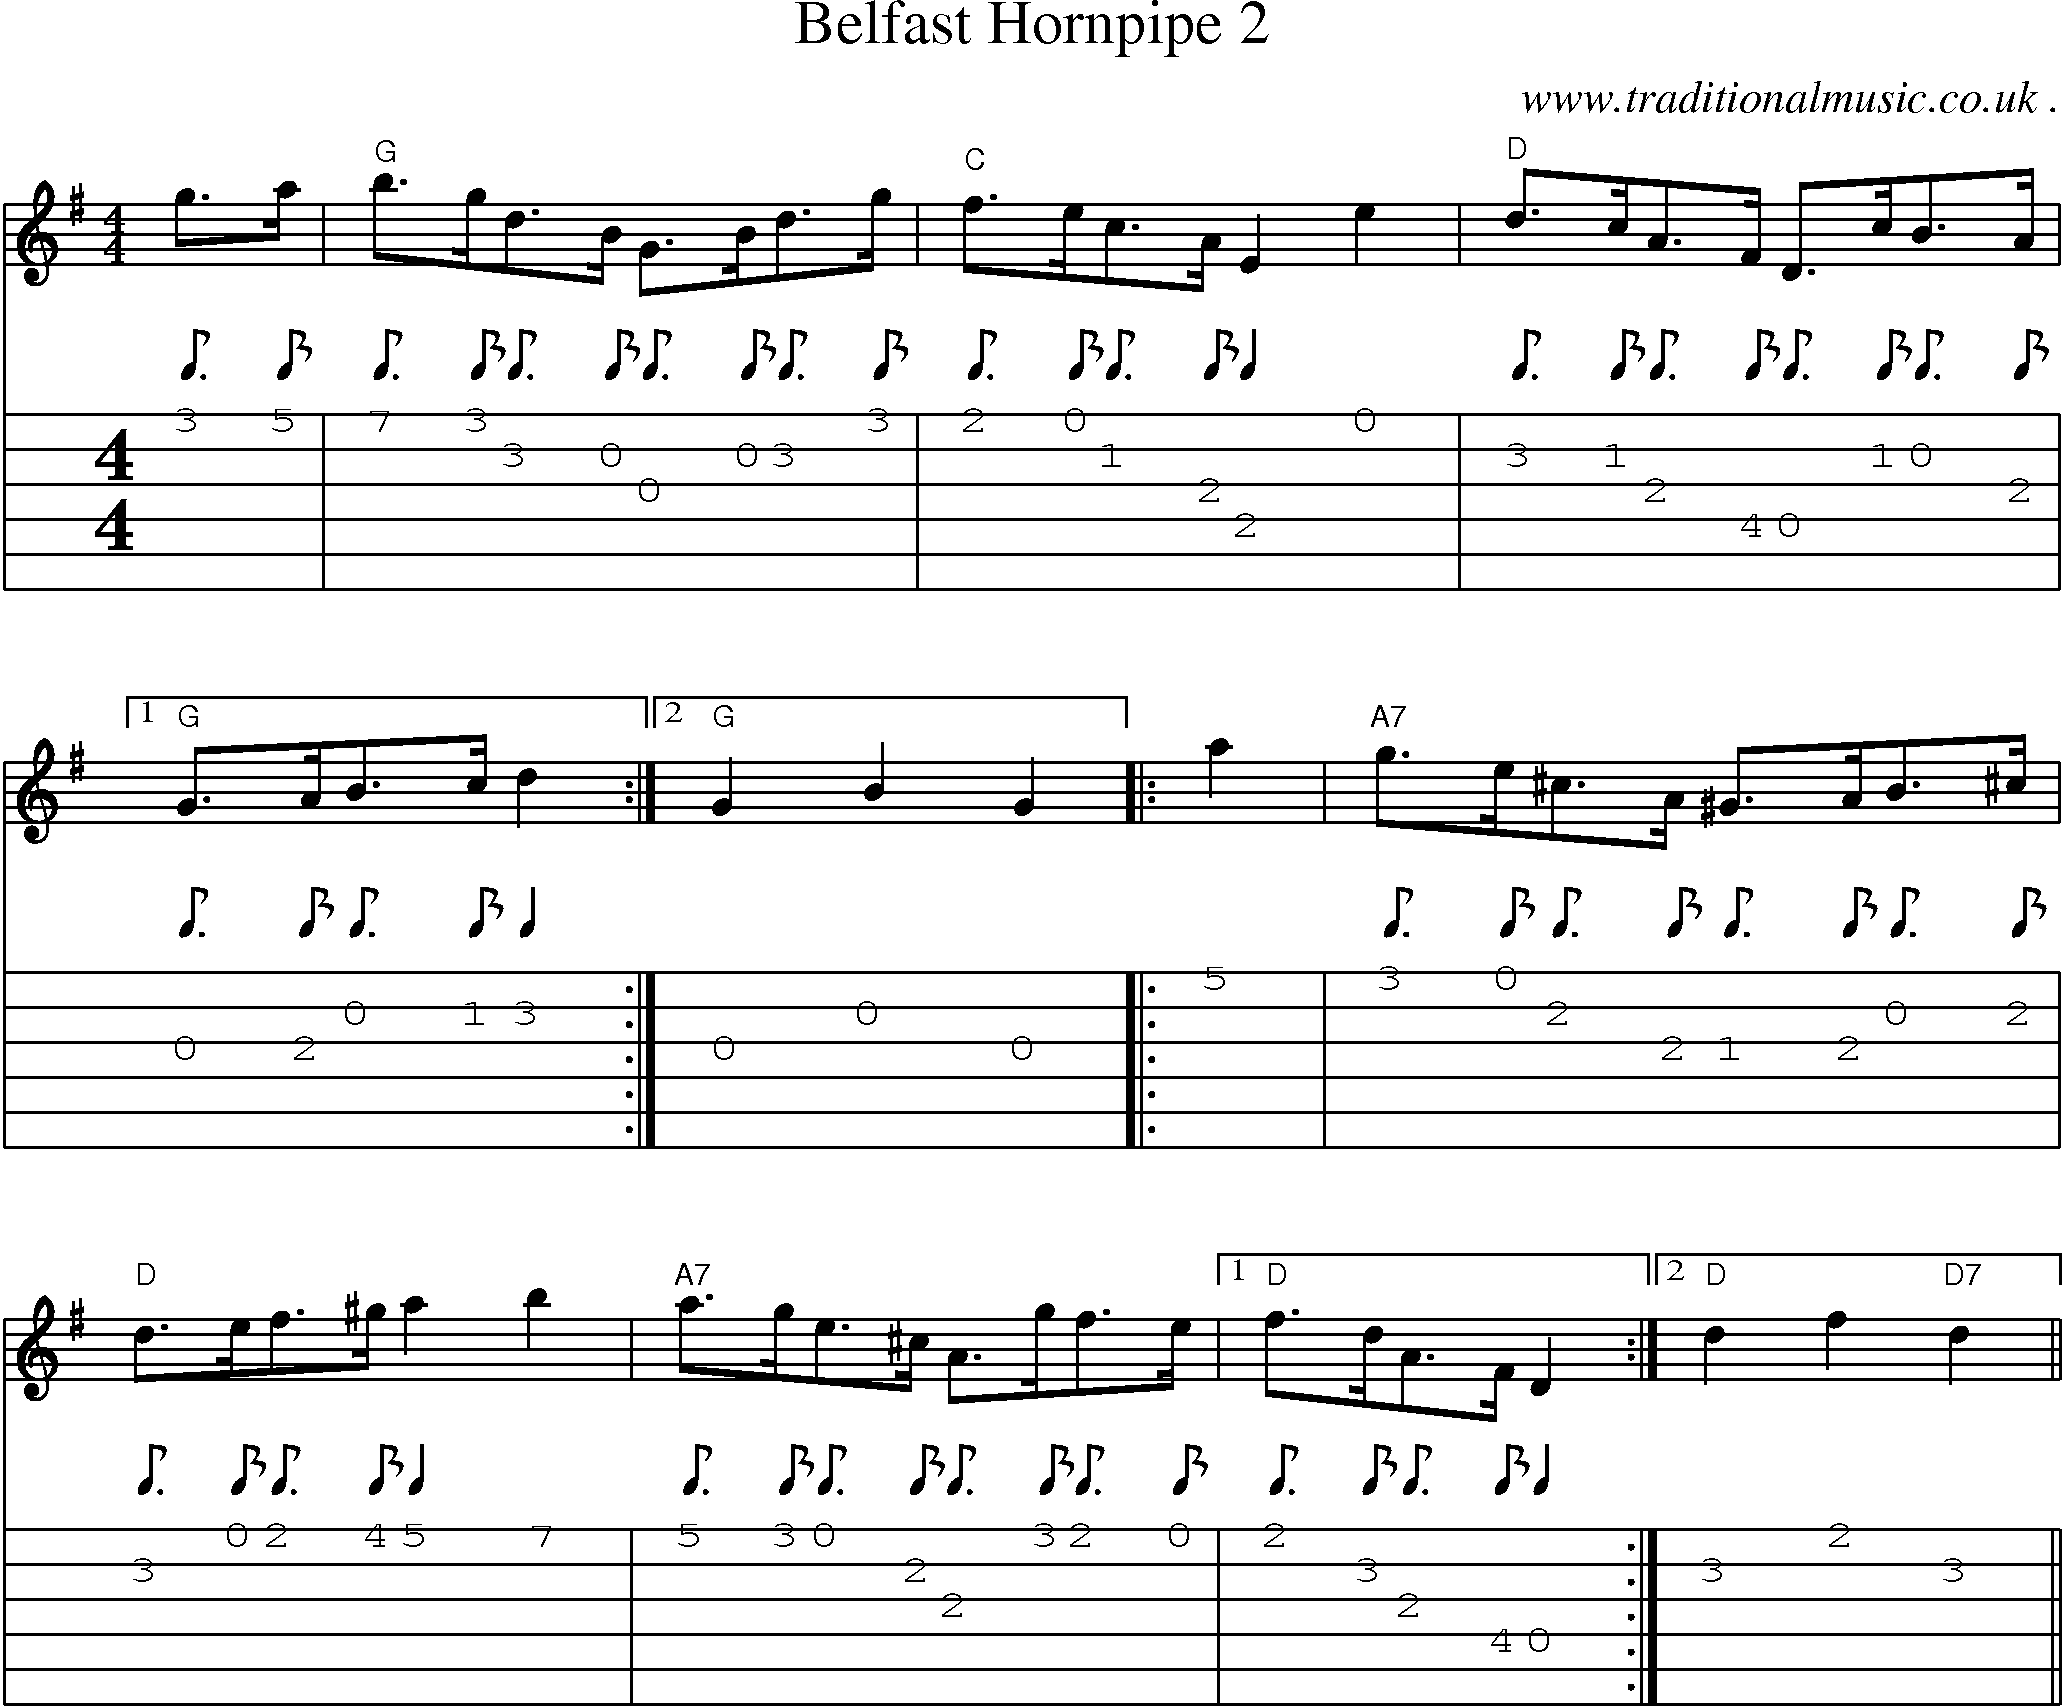 Sheet-Music and Guitar Tabs for Belfast Hornpipe 2